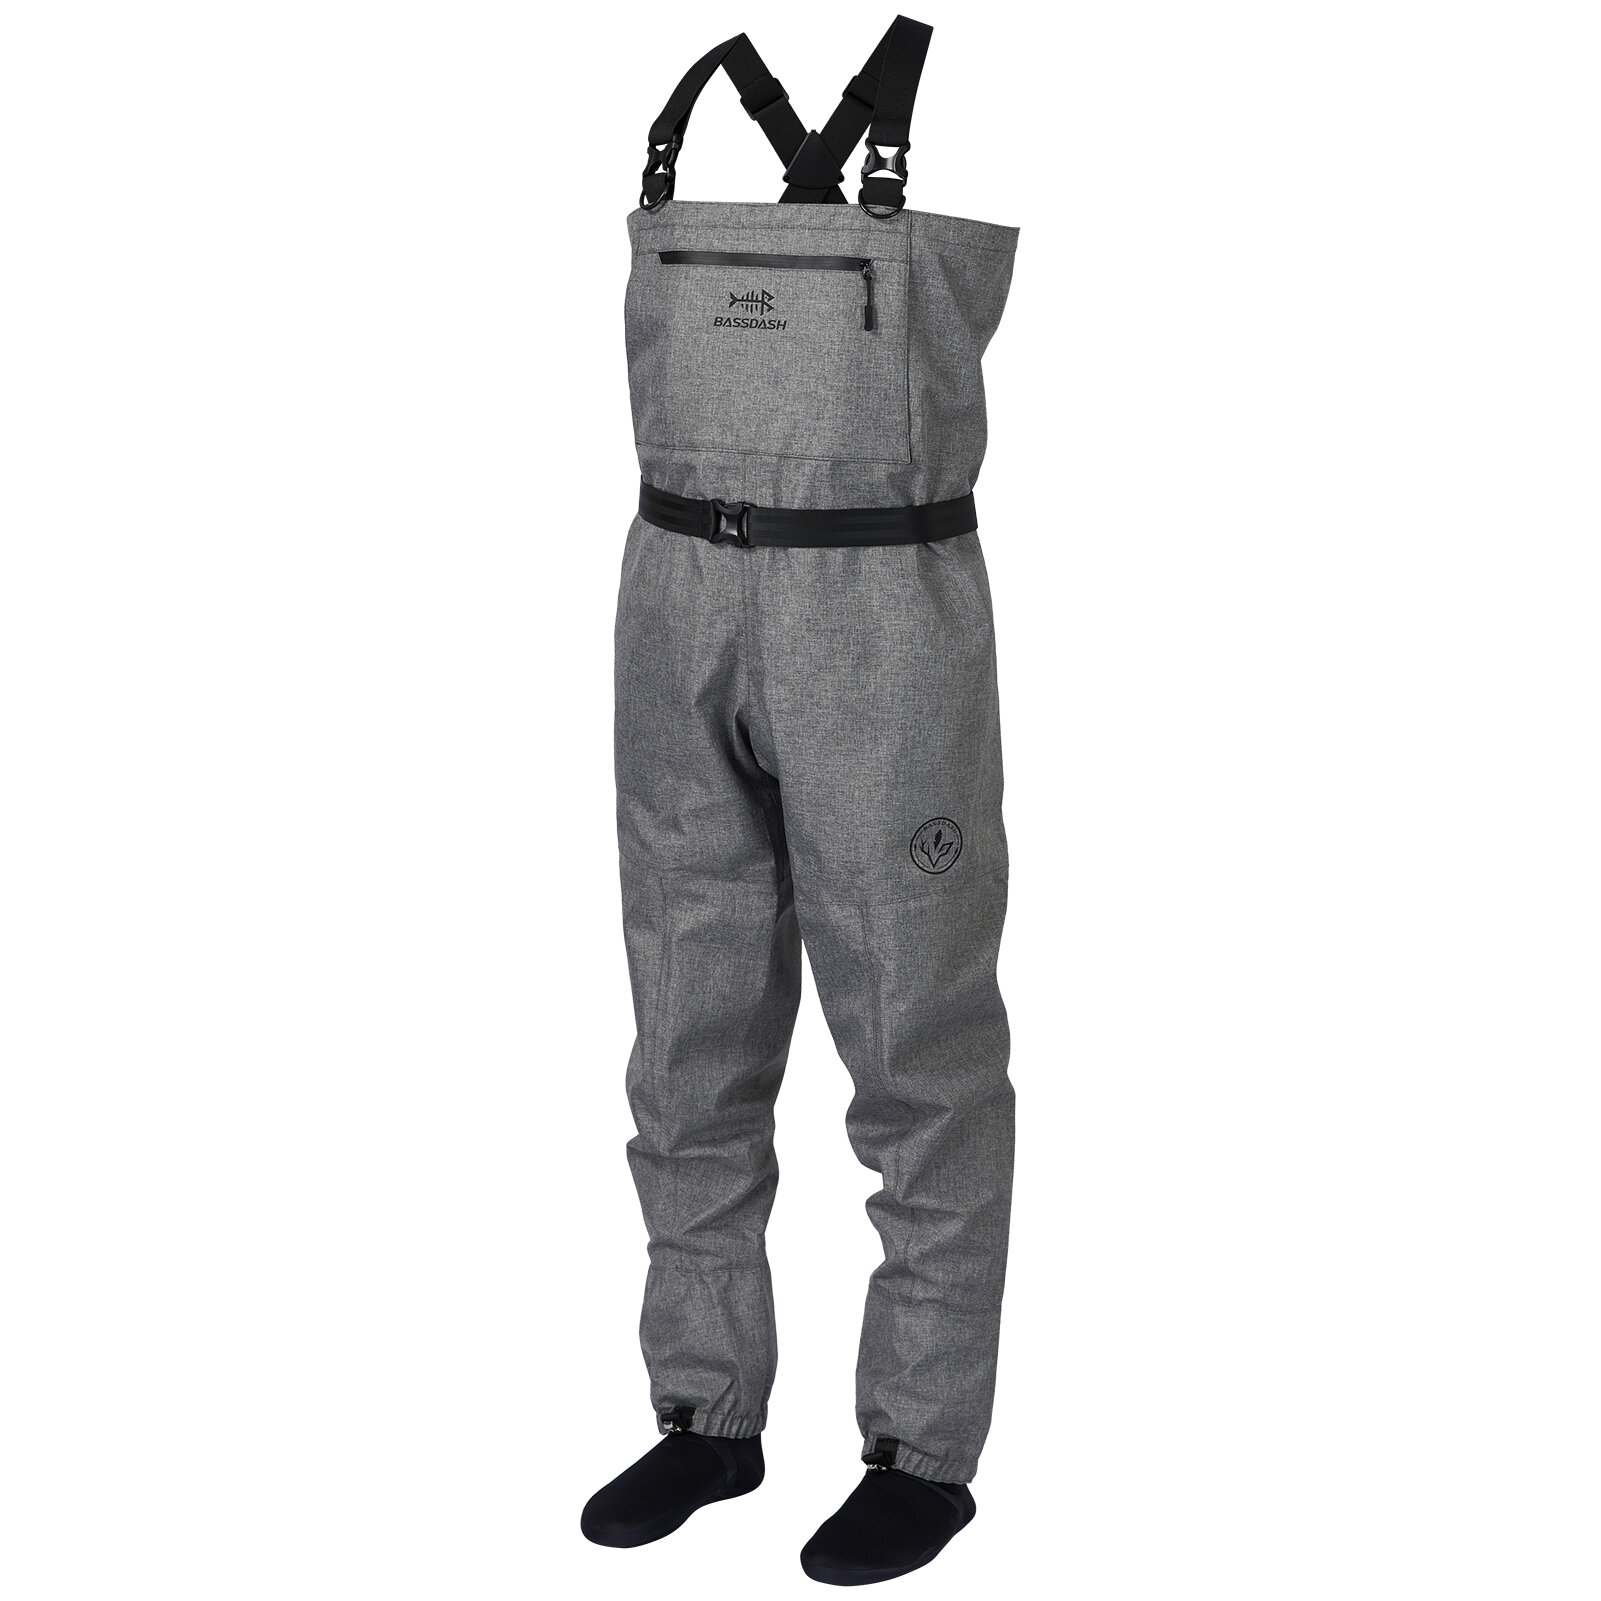 Bassdash IMMERSE Breathable Ripstop Stocking Foot Fishing Hunting Waders Lightweight Grey Chest Wader for Men Women